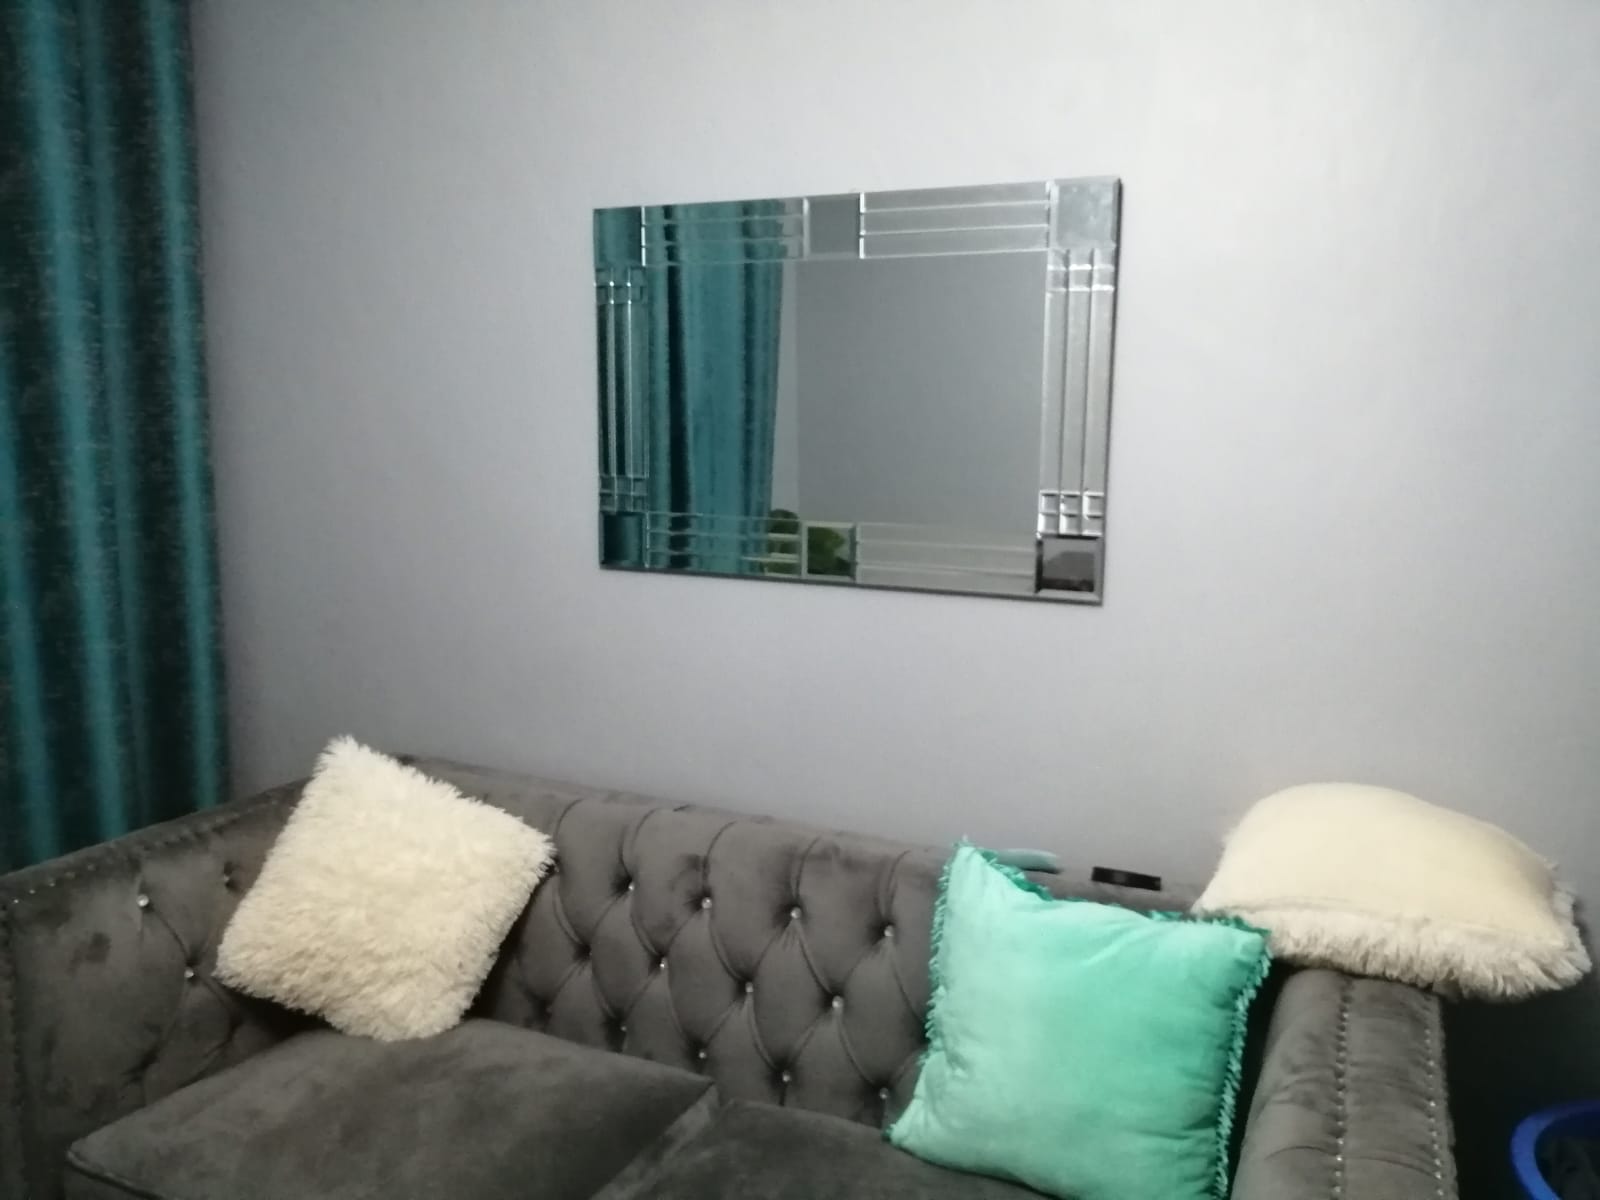 Load video: DIY WALL MIRROR USING BEVELLED MIRROR TILES FOR WALL DECOR By NIMMIZ HOME DECOR